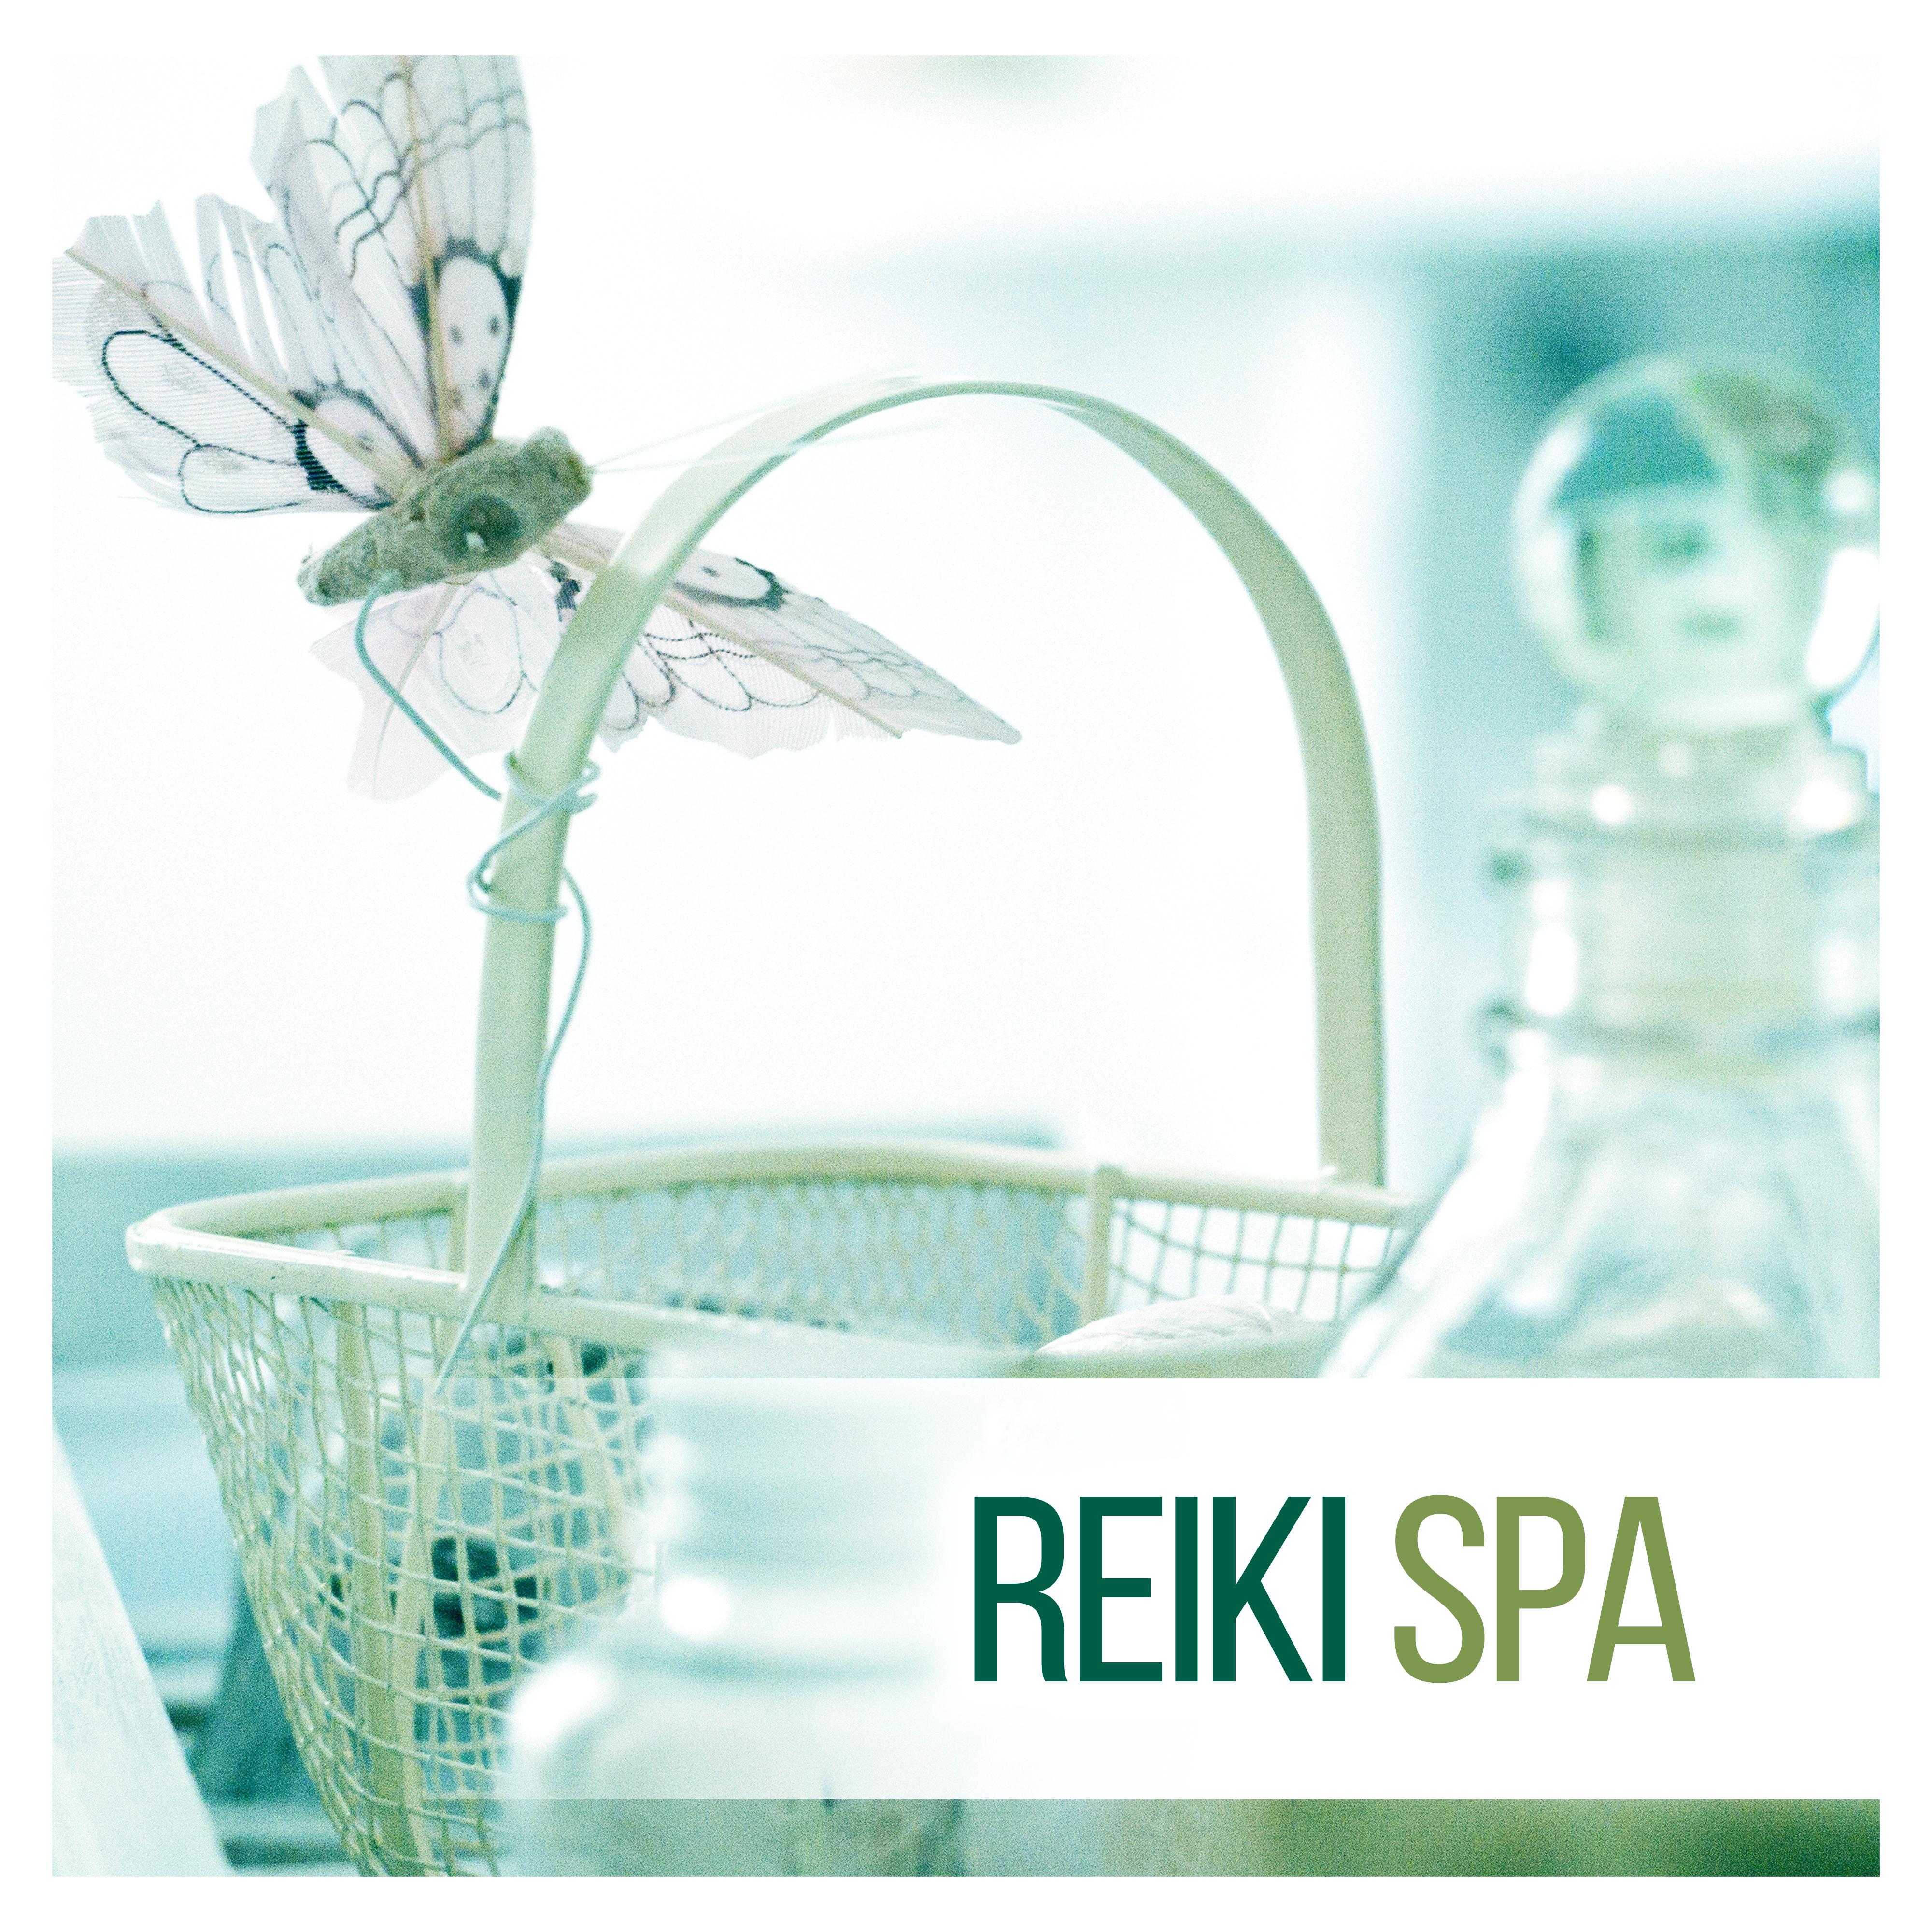 Reiki SPA – Relaxation Music for Spa & Wellness, Harmony and Balance, Healing Therapy Music, Reduce Anxiety and Stress